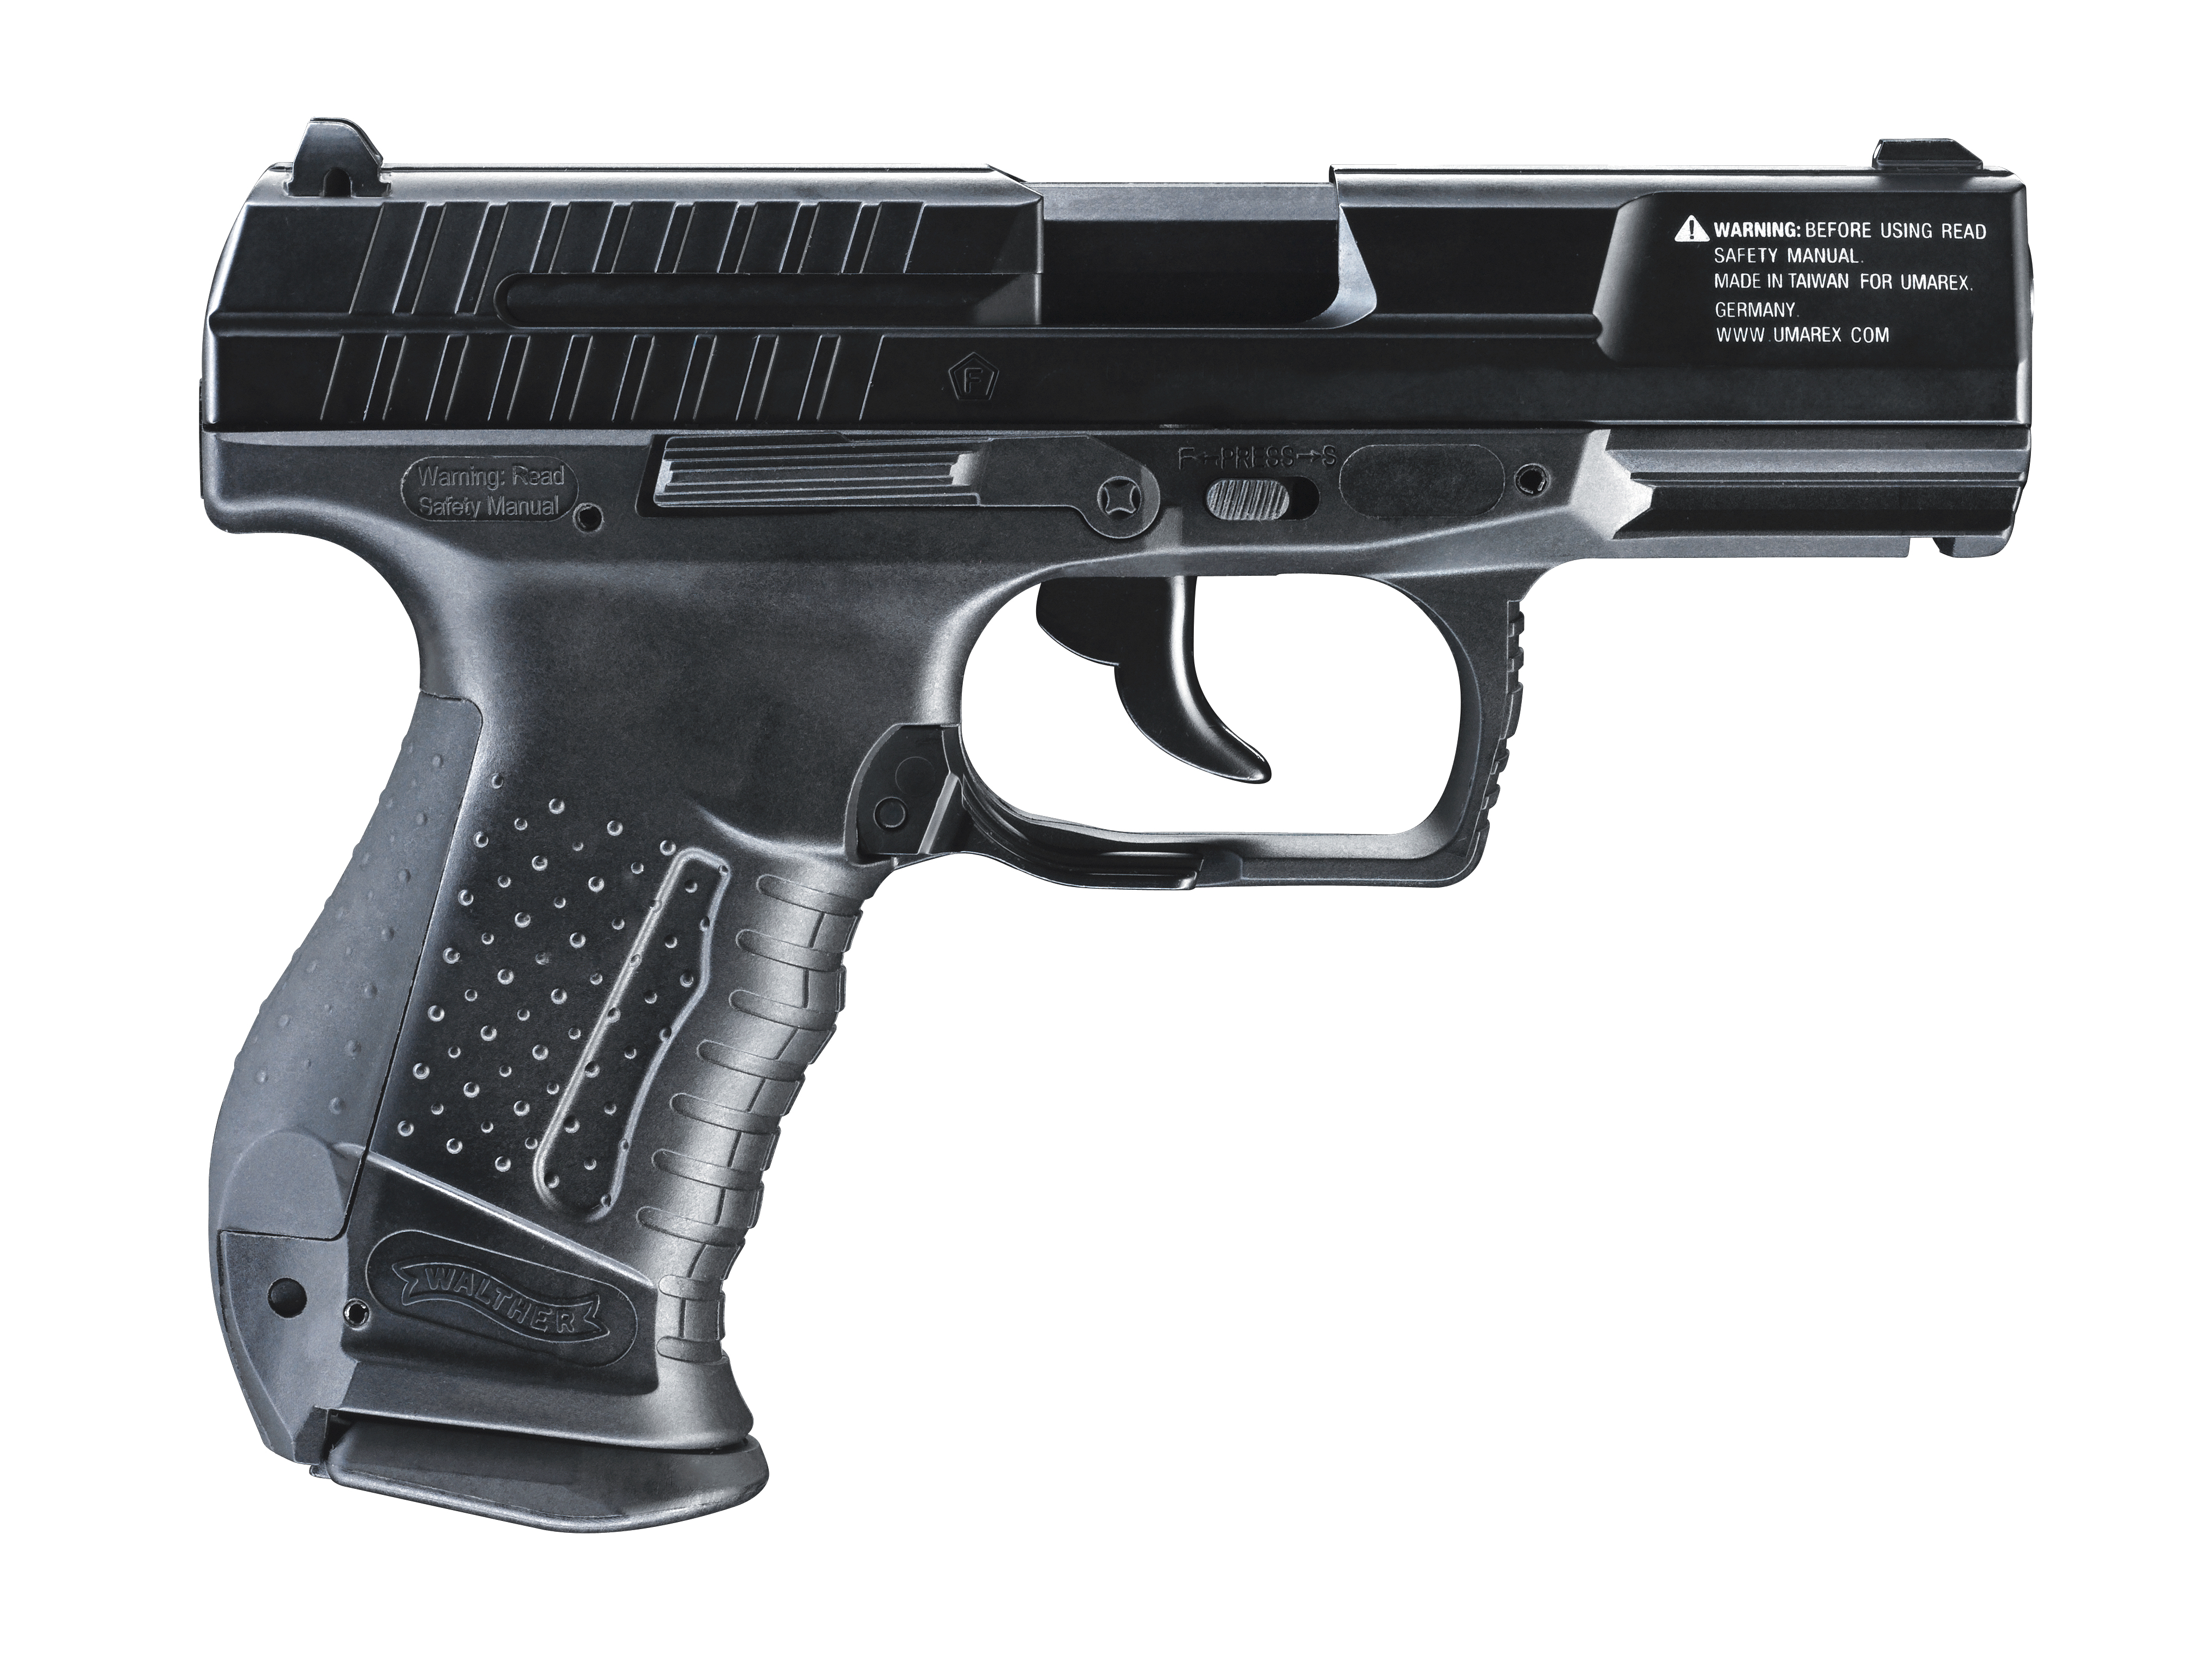 Walther P99 DAO Airsoftpistole - 6mm BB